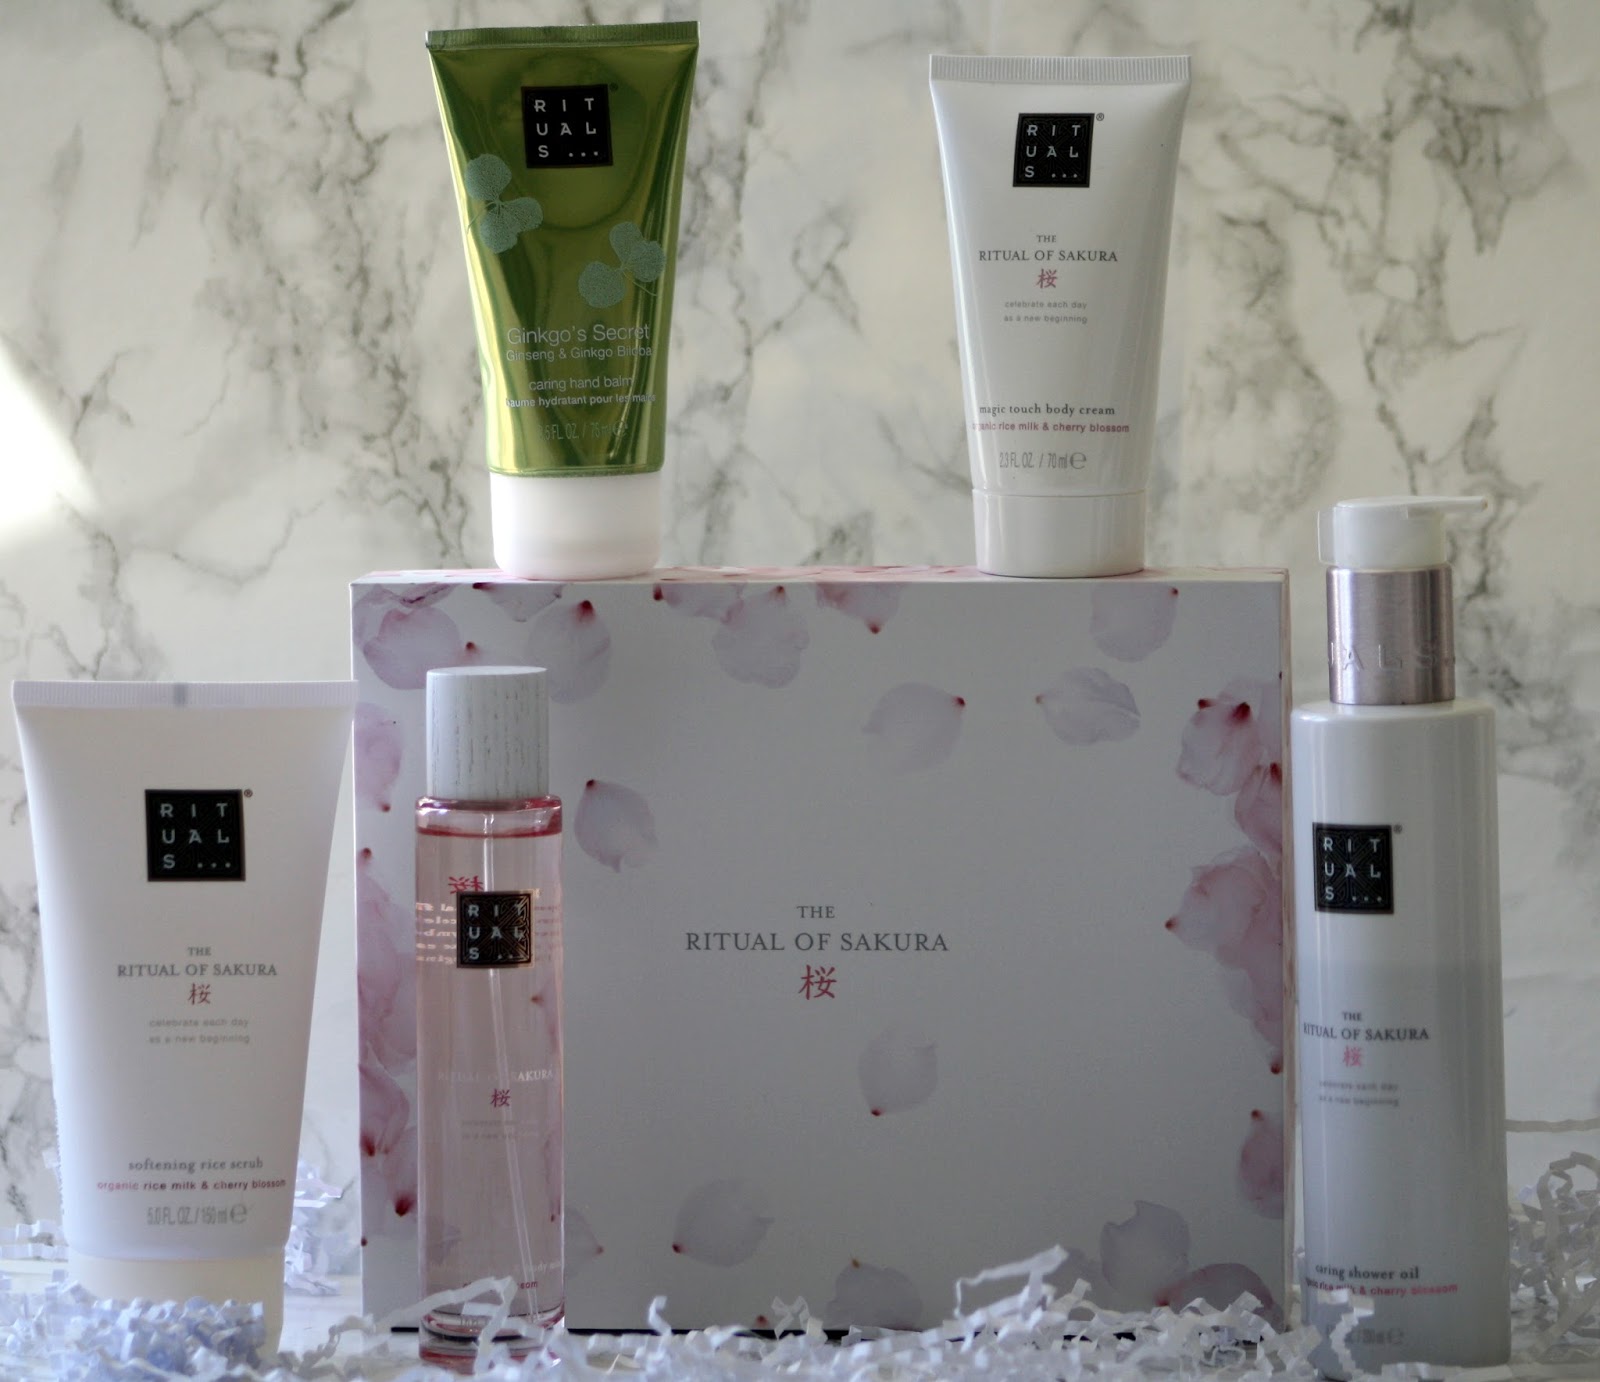 Glossybox Review - Limited Edition Rituals Box - Doused in Pink